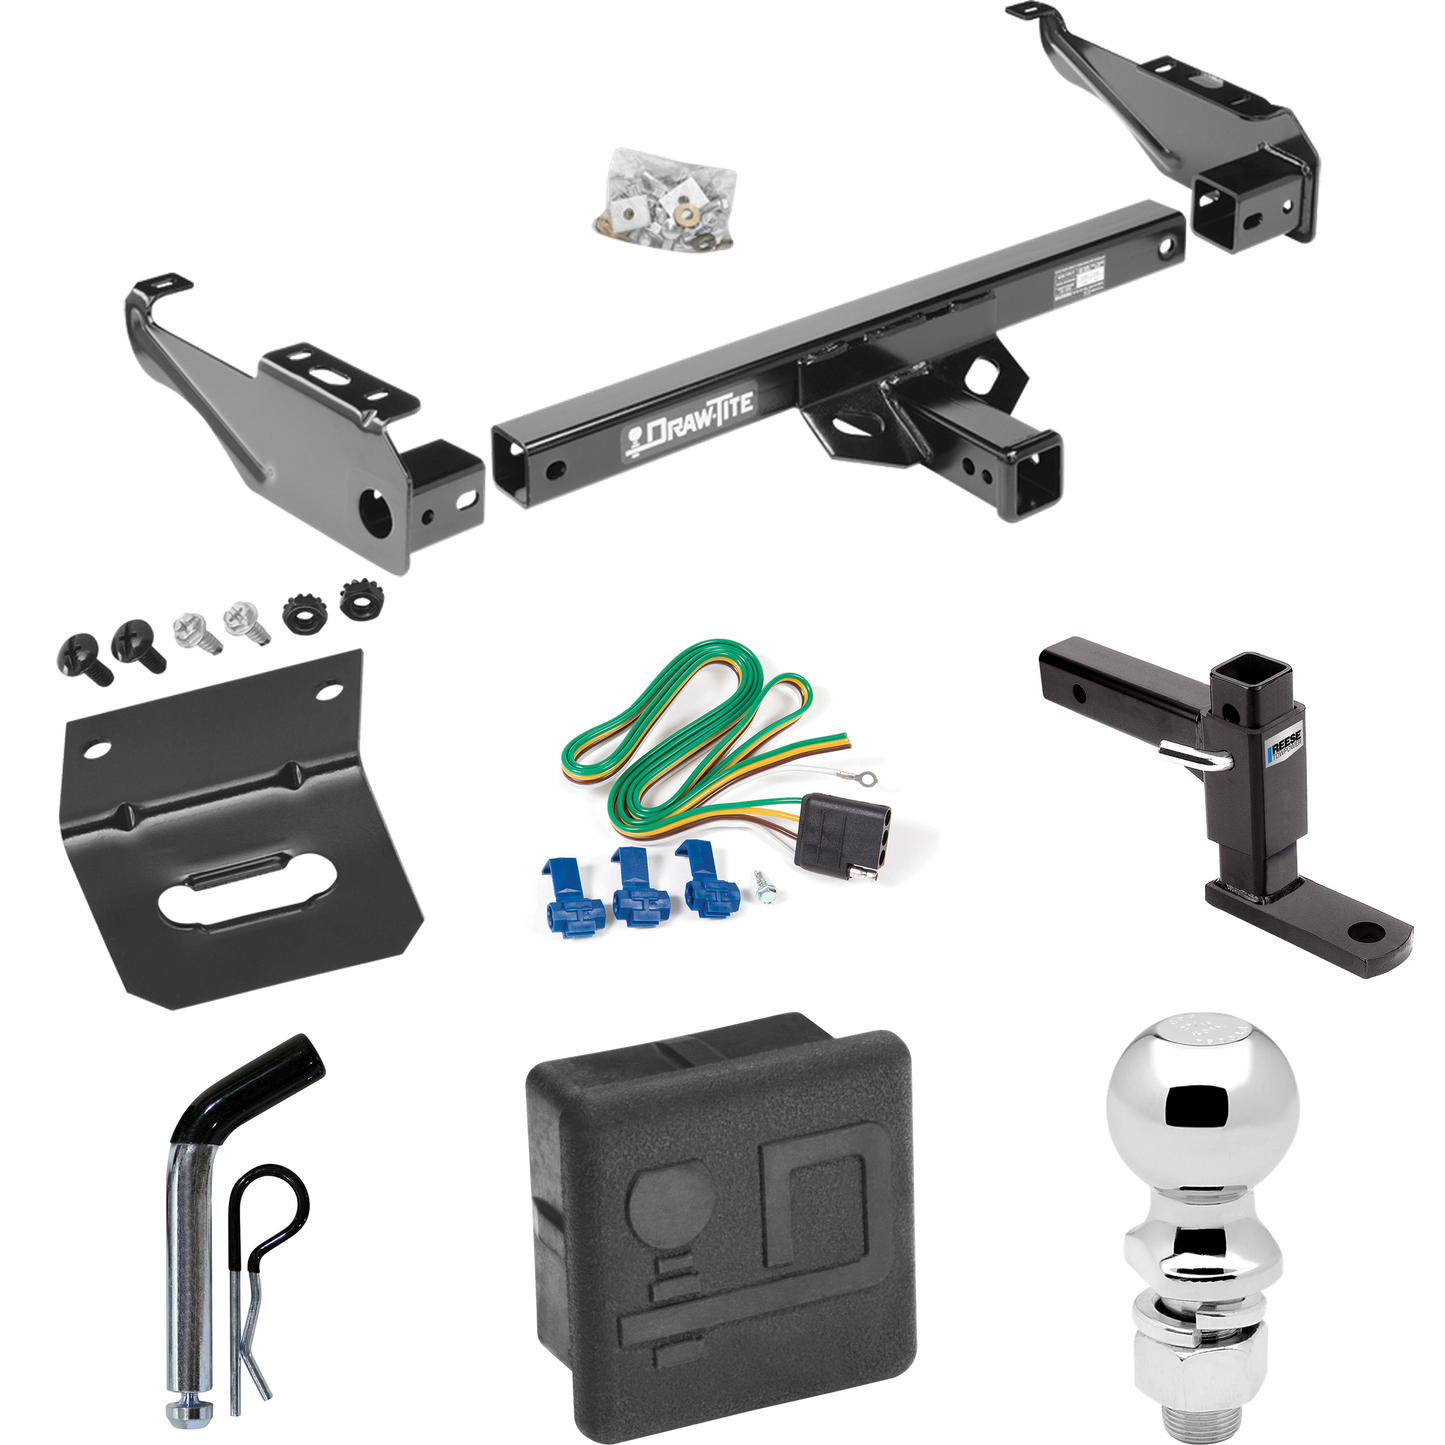 Fits 1967-1977 Dodge W100 Trailer Hitch Tow PKG w/ 4-Flat Wiring + Adjustable Drop Rise Ball Mount + Pin/Clip + 2-5/16" Ball + Wiring Bracket + Hitch Cover By Draw-Tite